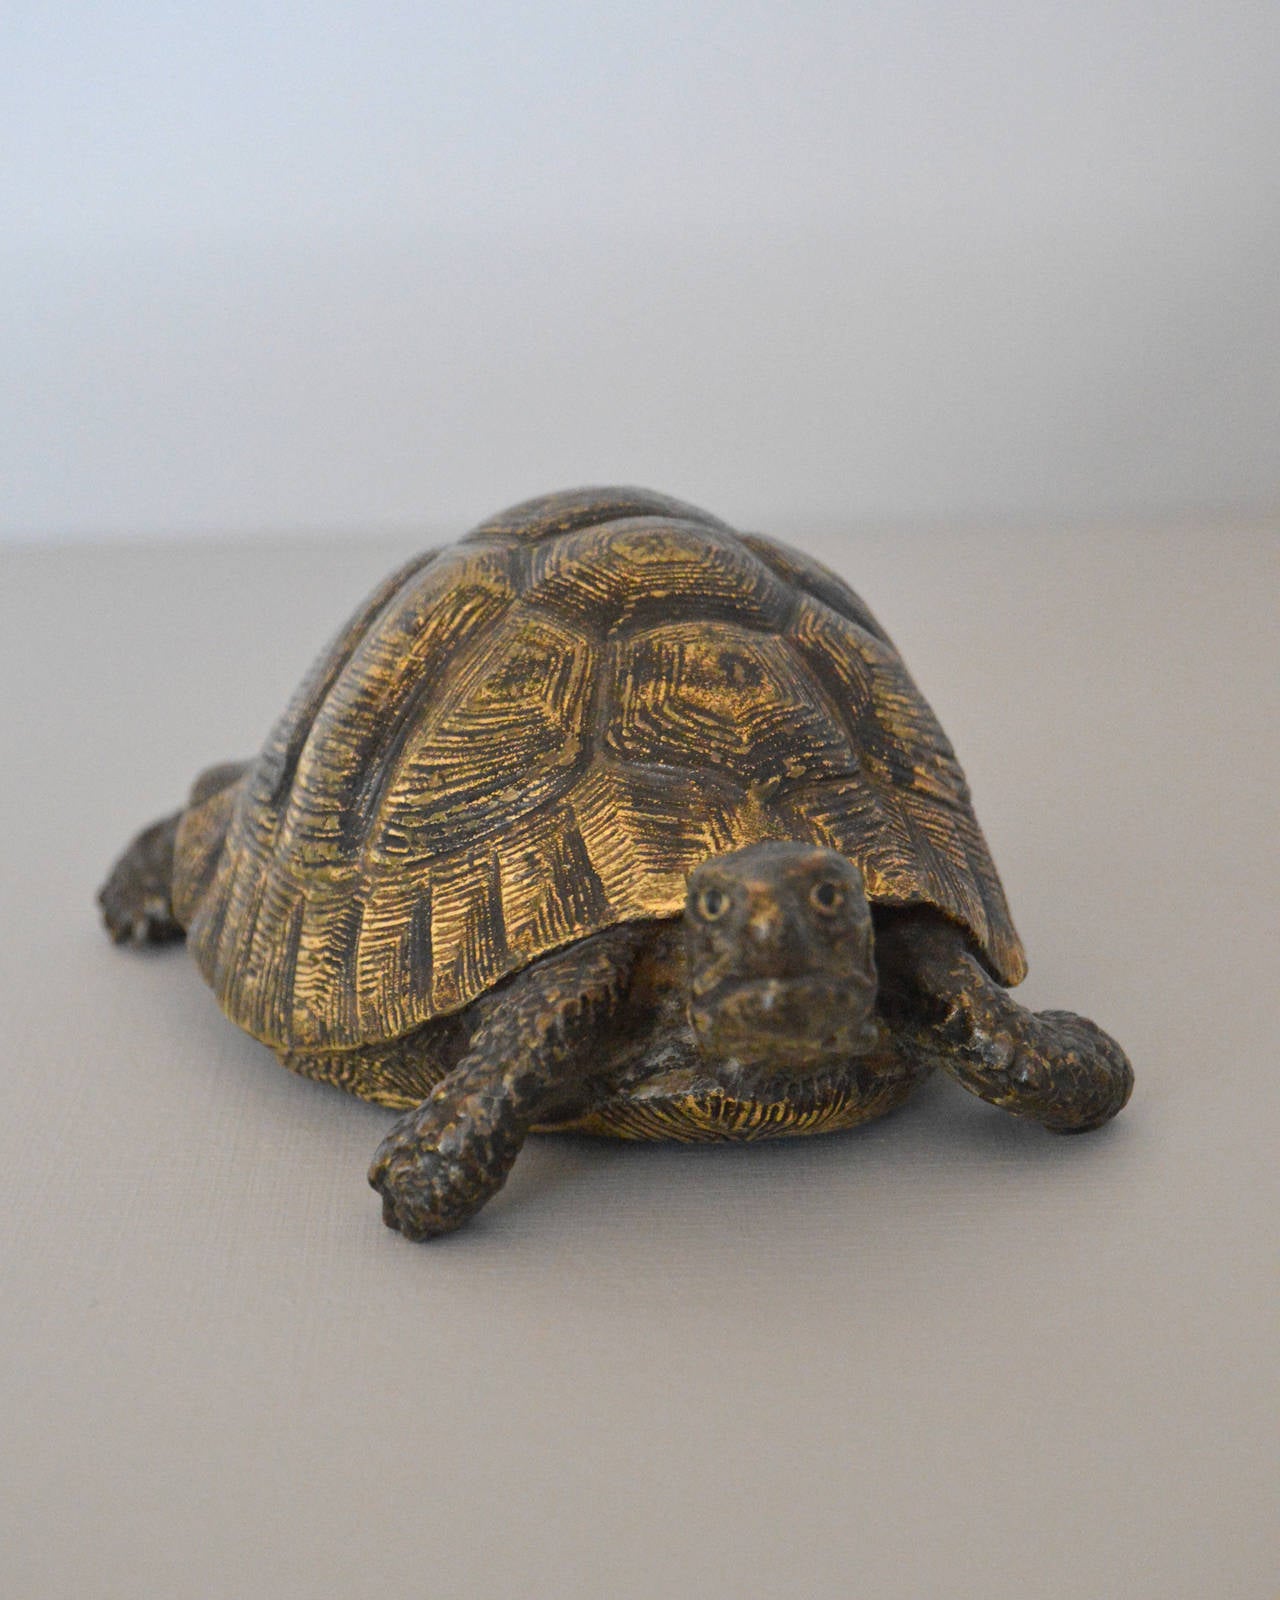 19th Century Cold Painted Bronze Sculpture of a Tortoise by Bergman